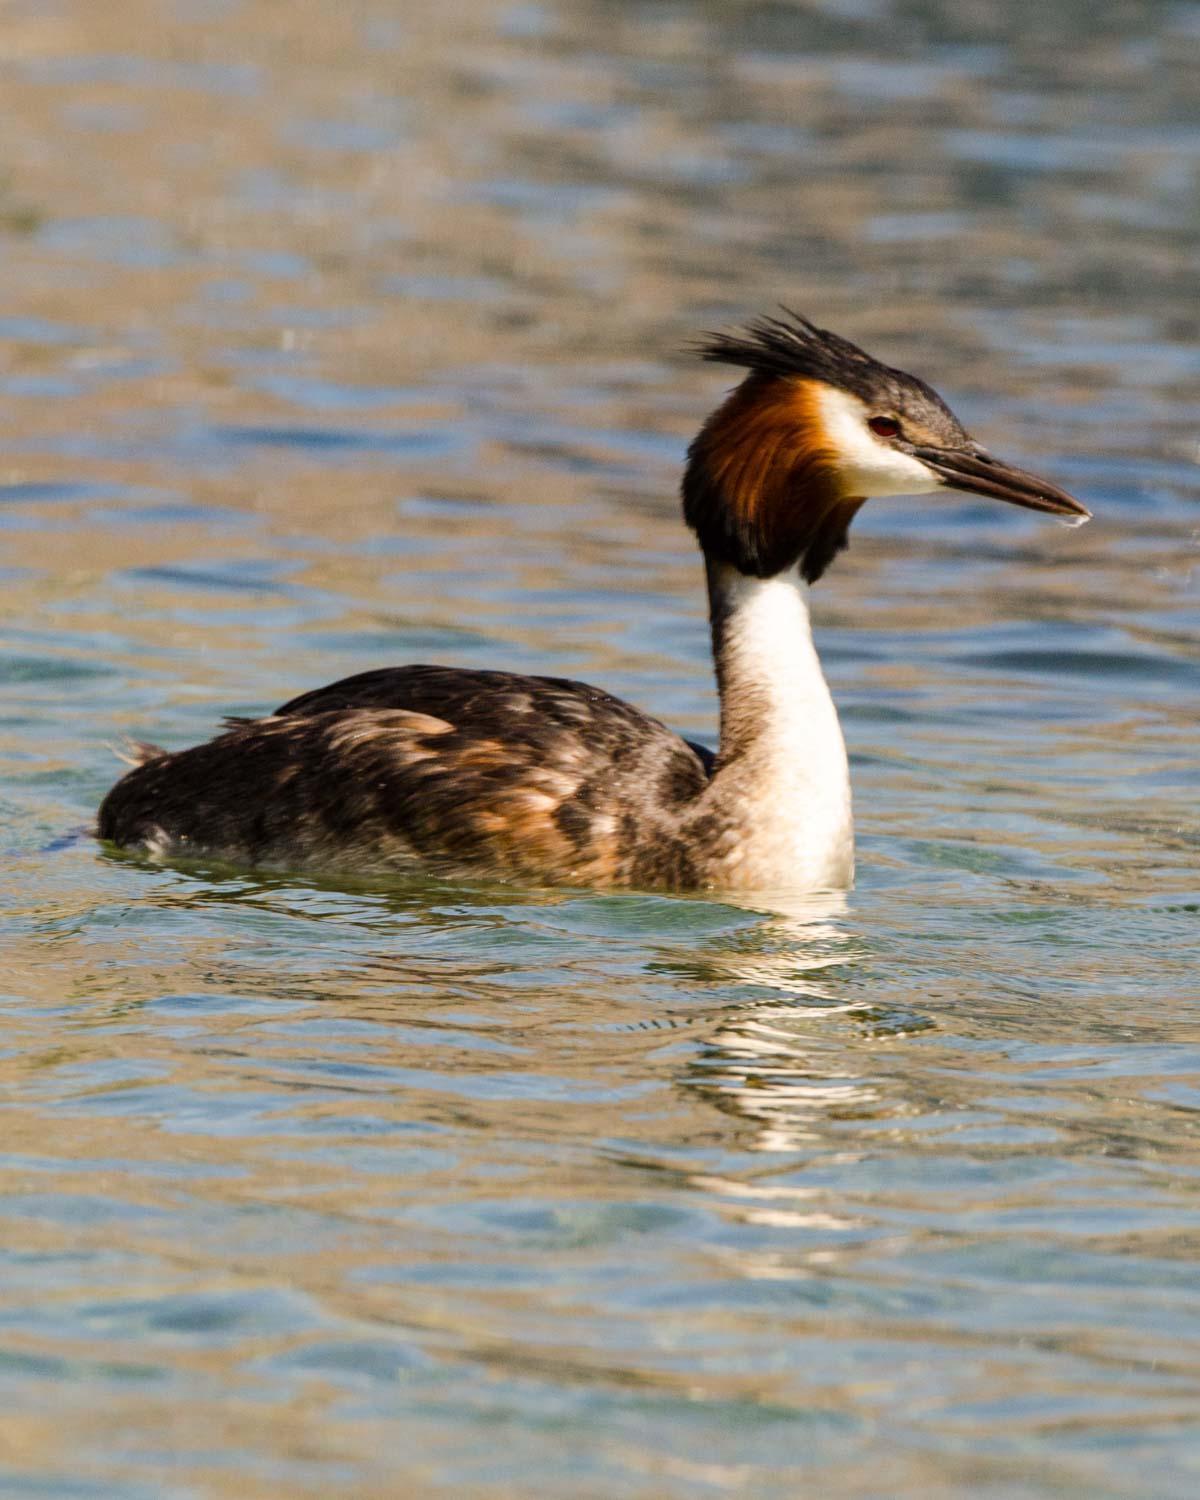 Great Crested Grebe Photo by Bob Hasenick